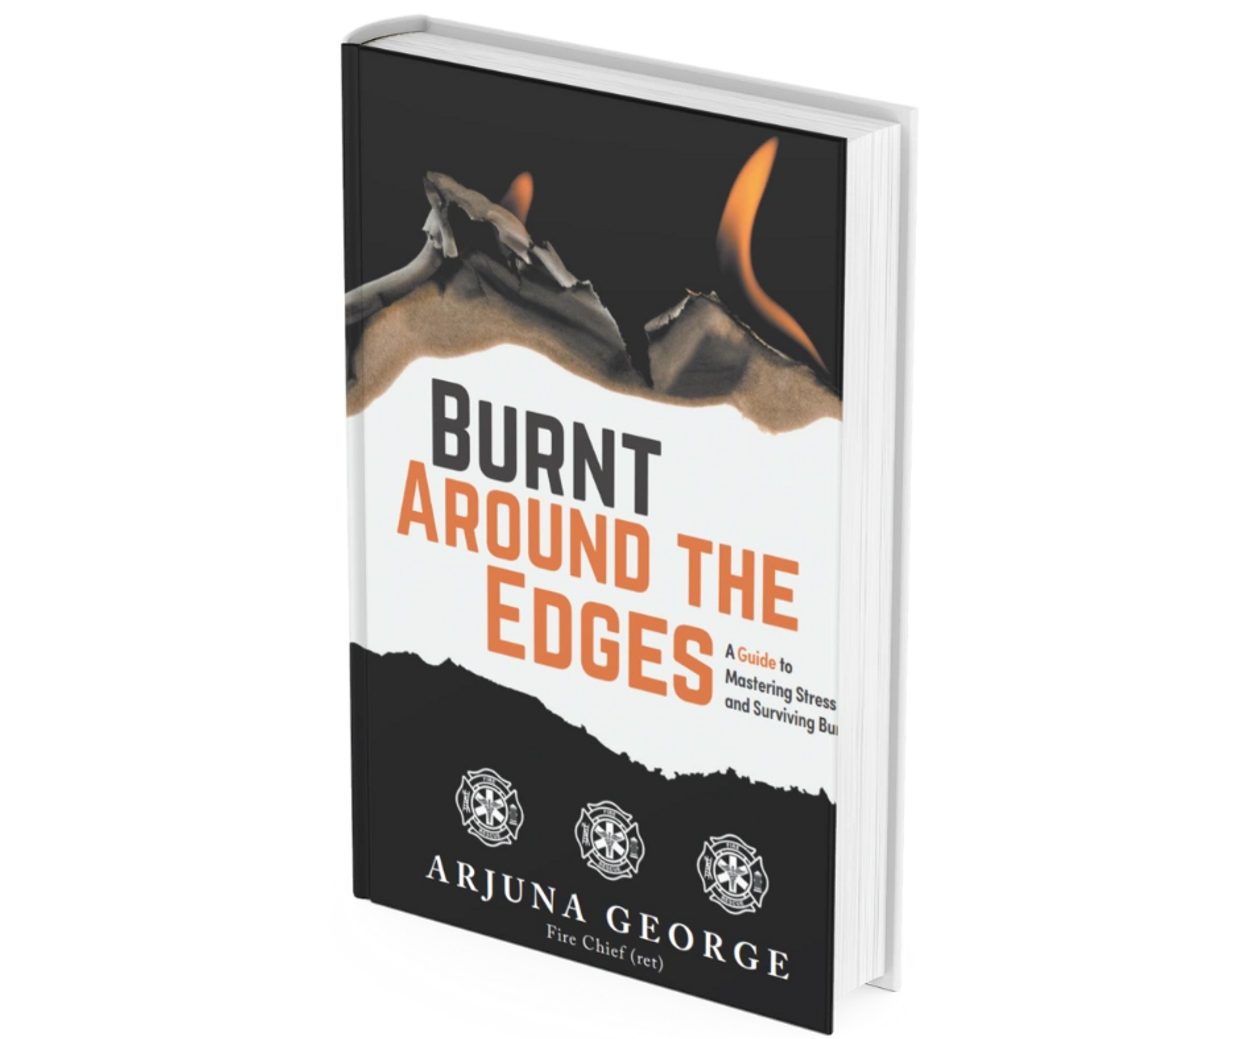 An image of the book Burnt Around the Edges - By Author Arjuna George of Silver Arrow Coaching